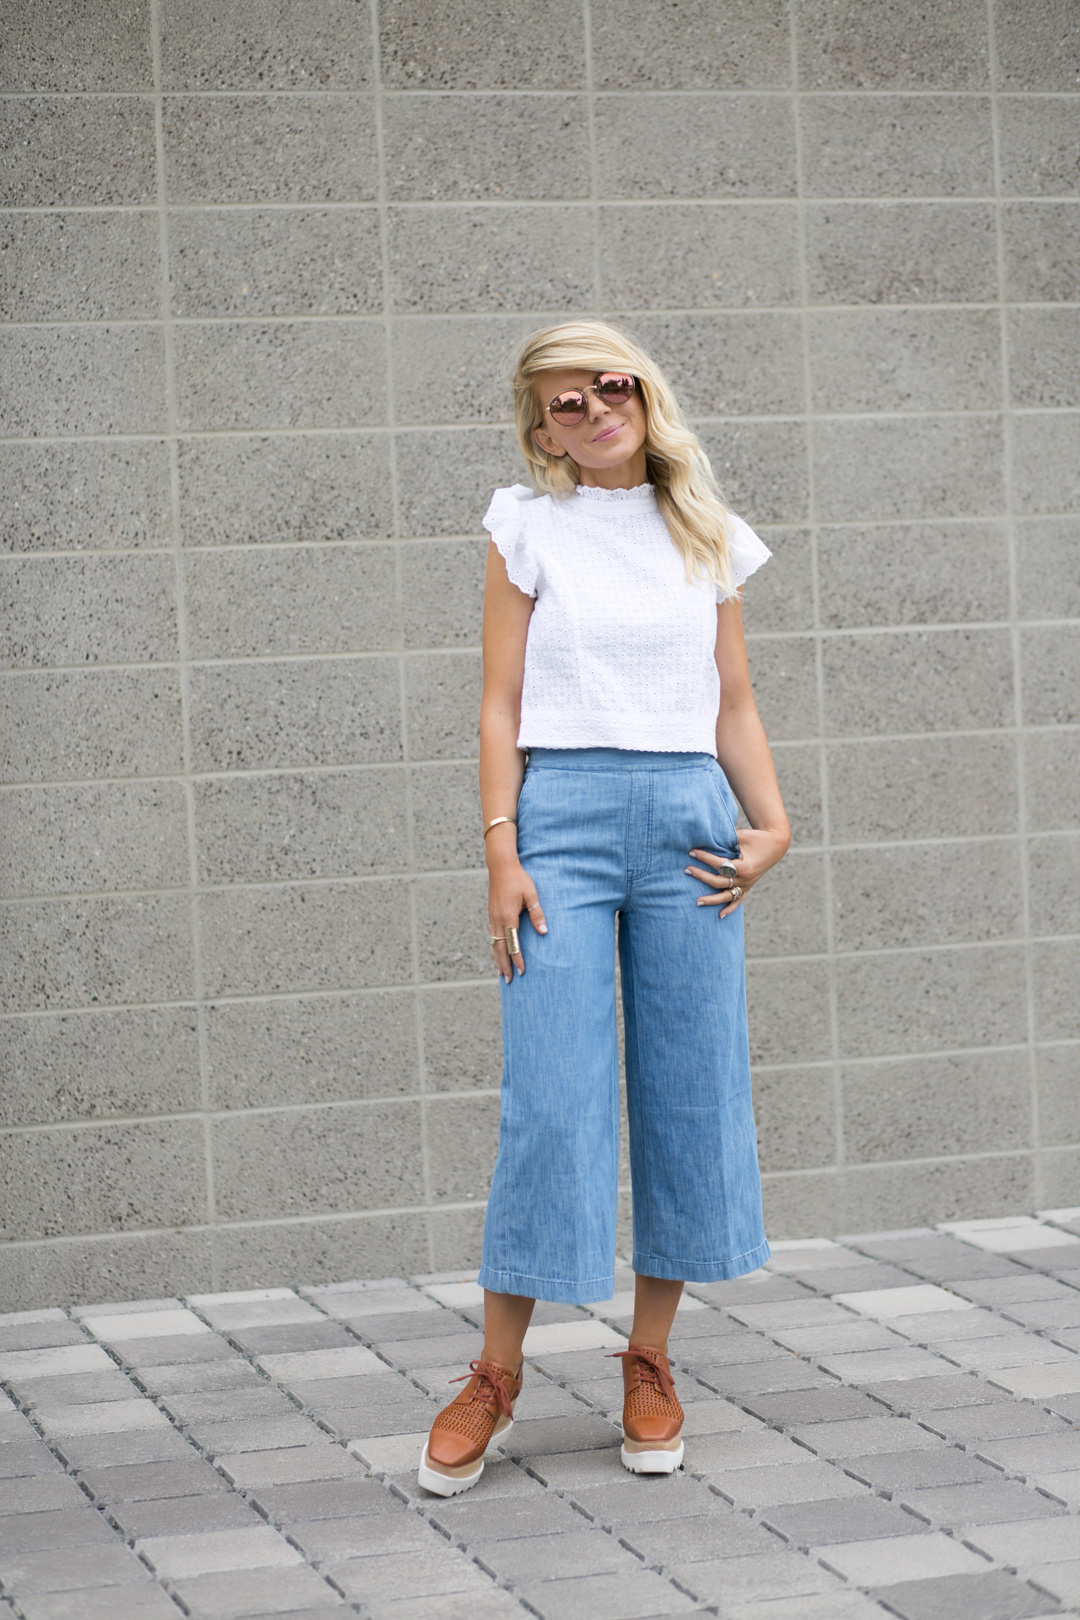 lisa allen of lunchpails and lipstick wearing cropped chambray pants and a white eyelet top with stella mccartney platforms